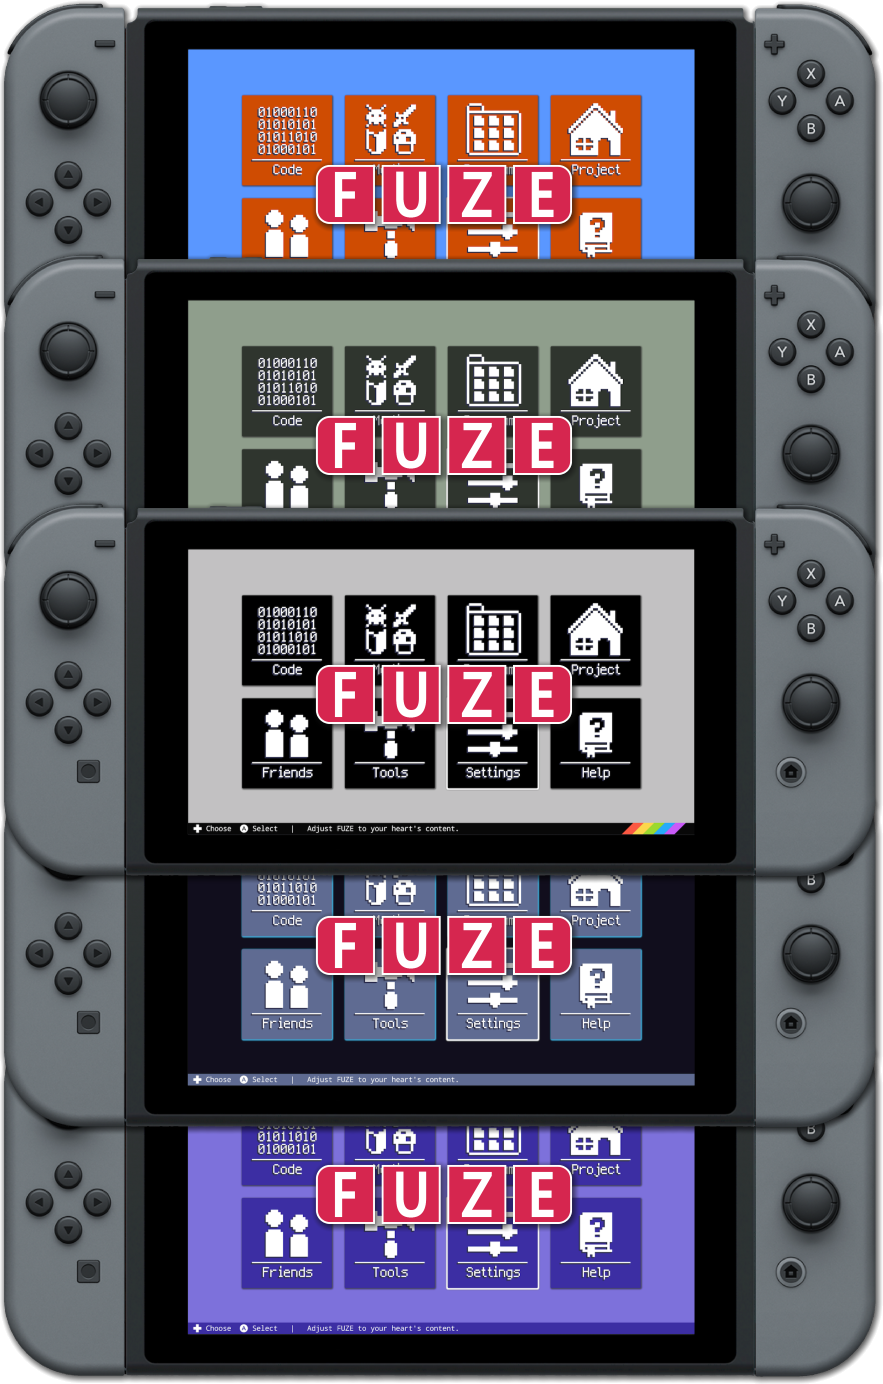 The FUZE4 Nintendo Switch home menu in a selection of themes